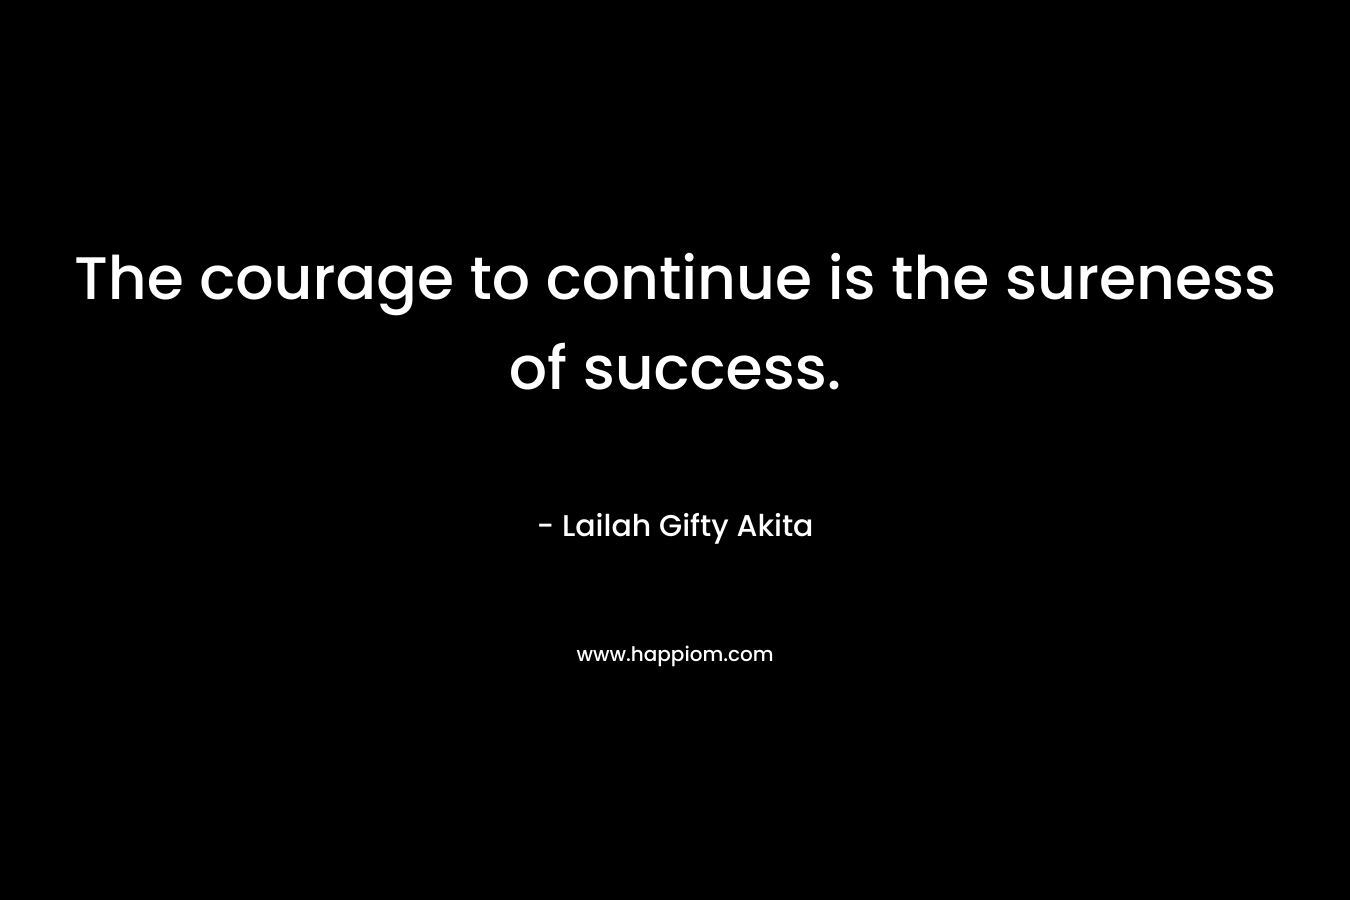 The courage to continue is the sureness of success.